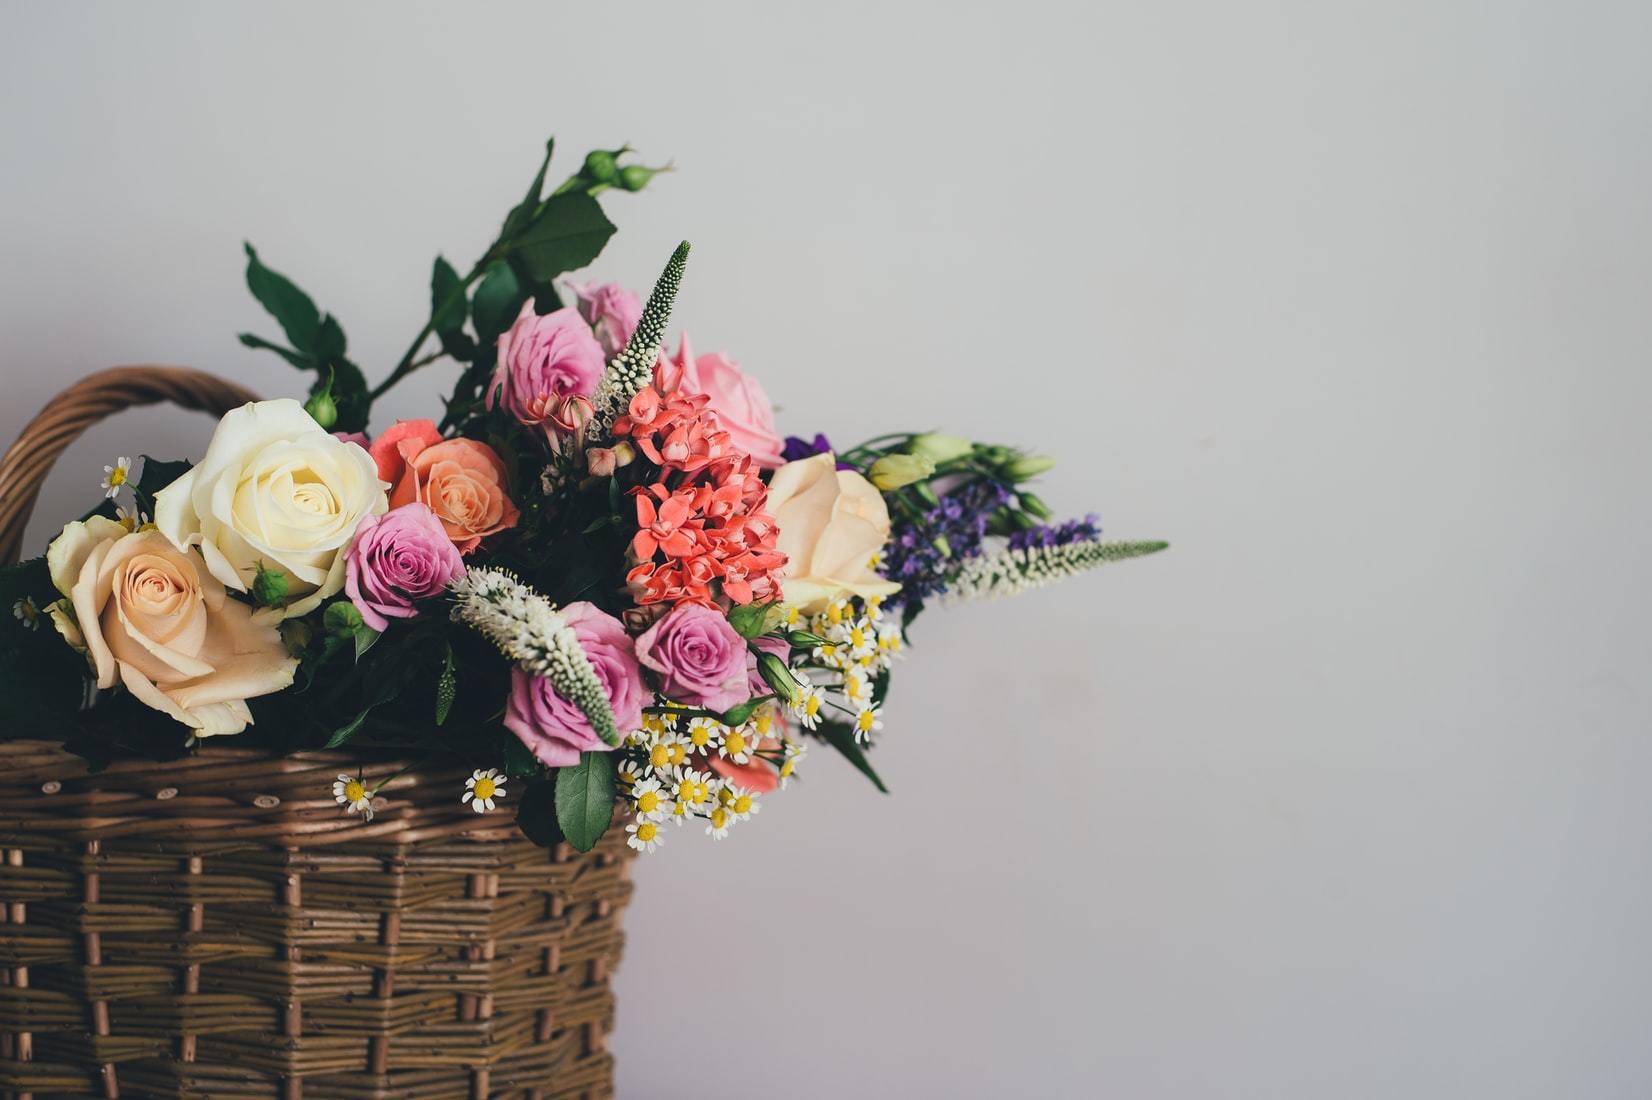 Flying Flowers Discount Codes 15 Off at MyVoucherCodes!